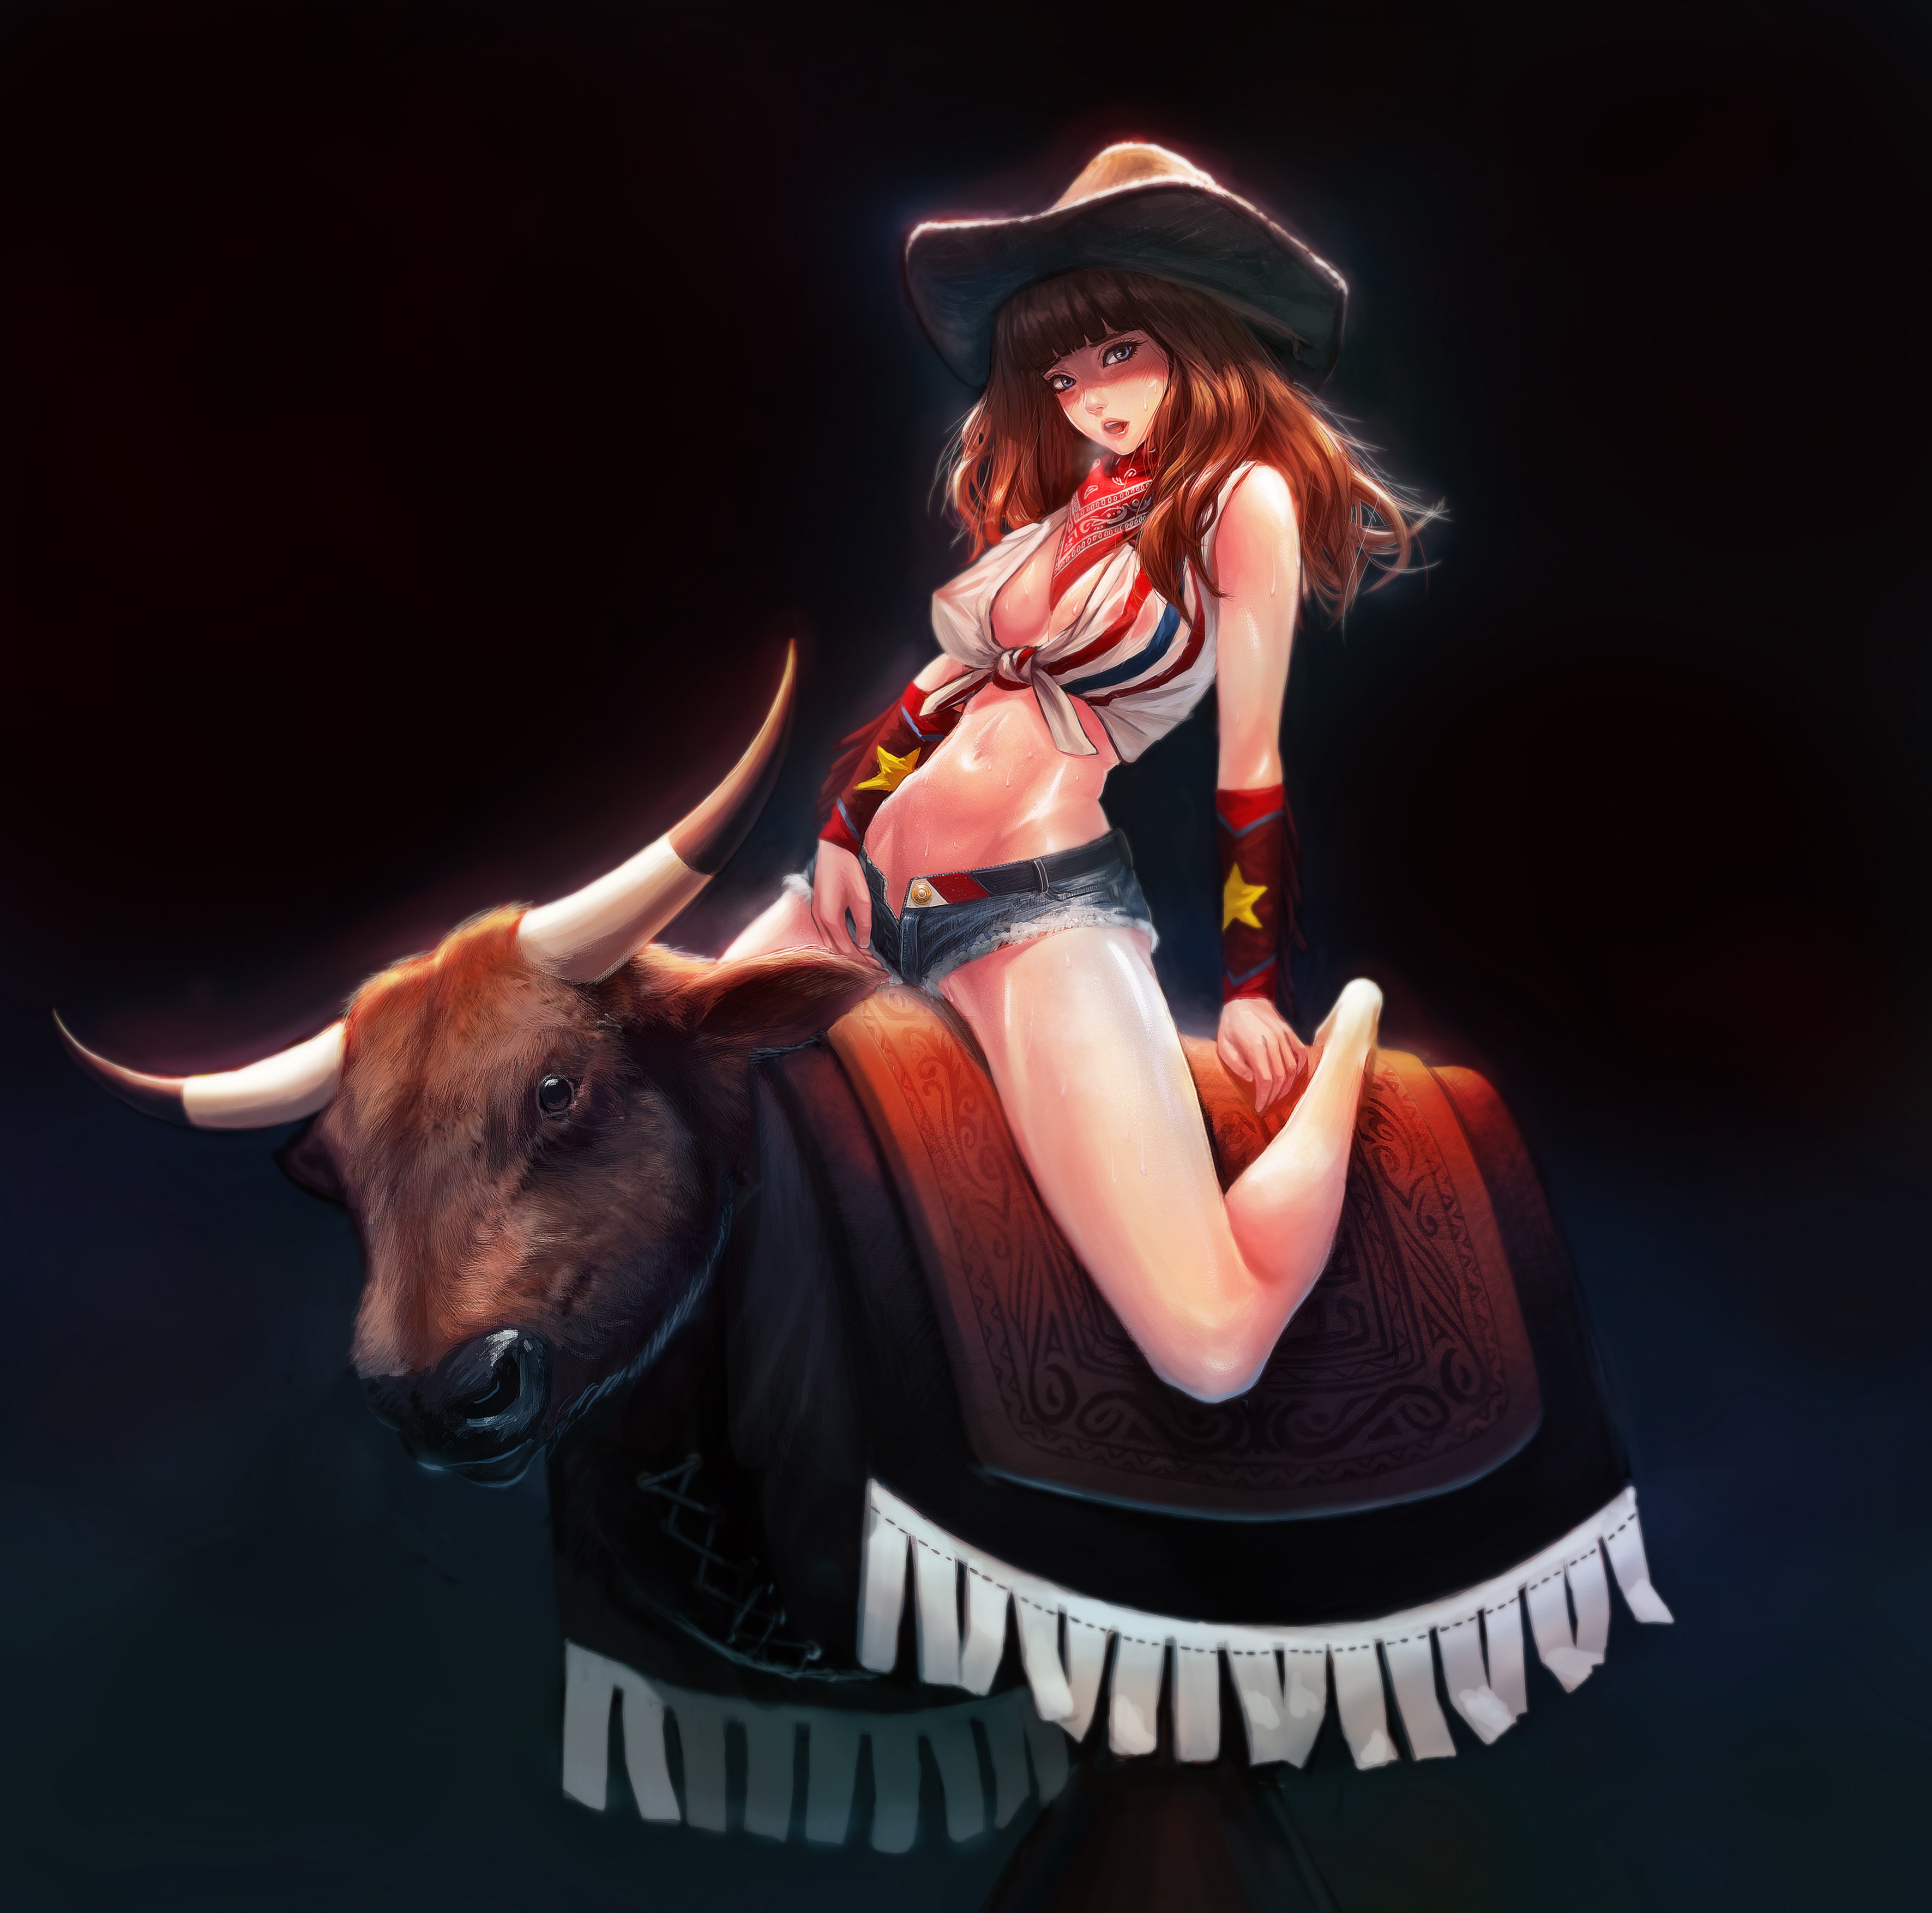 Anime 3543x3508 anime anime girls feet no bra legs long hair cowgirl bull Jungon Pixiv hat women with hats boobs belly unbuttoned thighs dark background